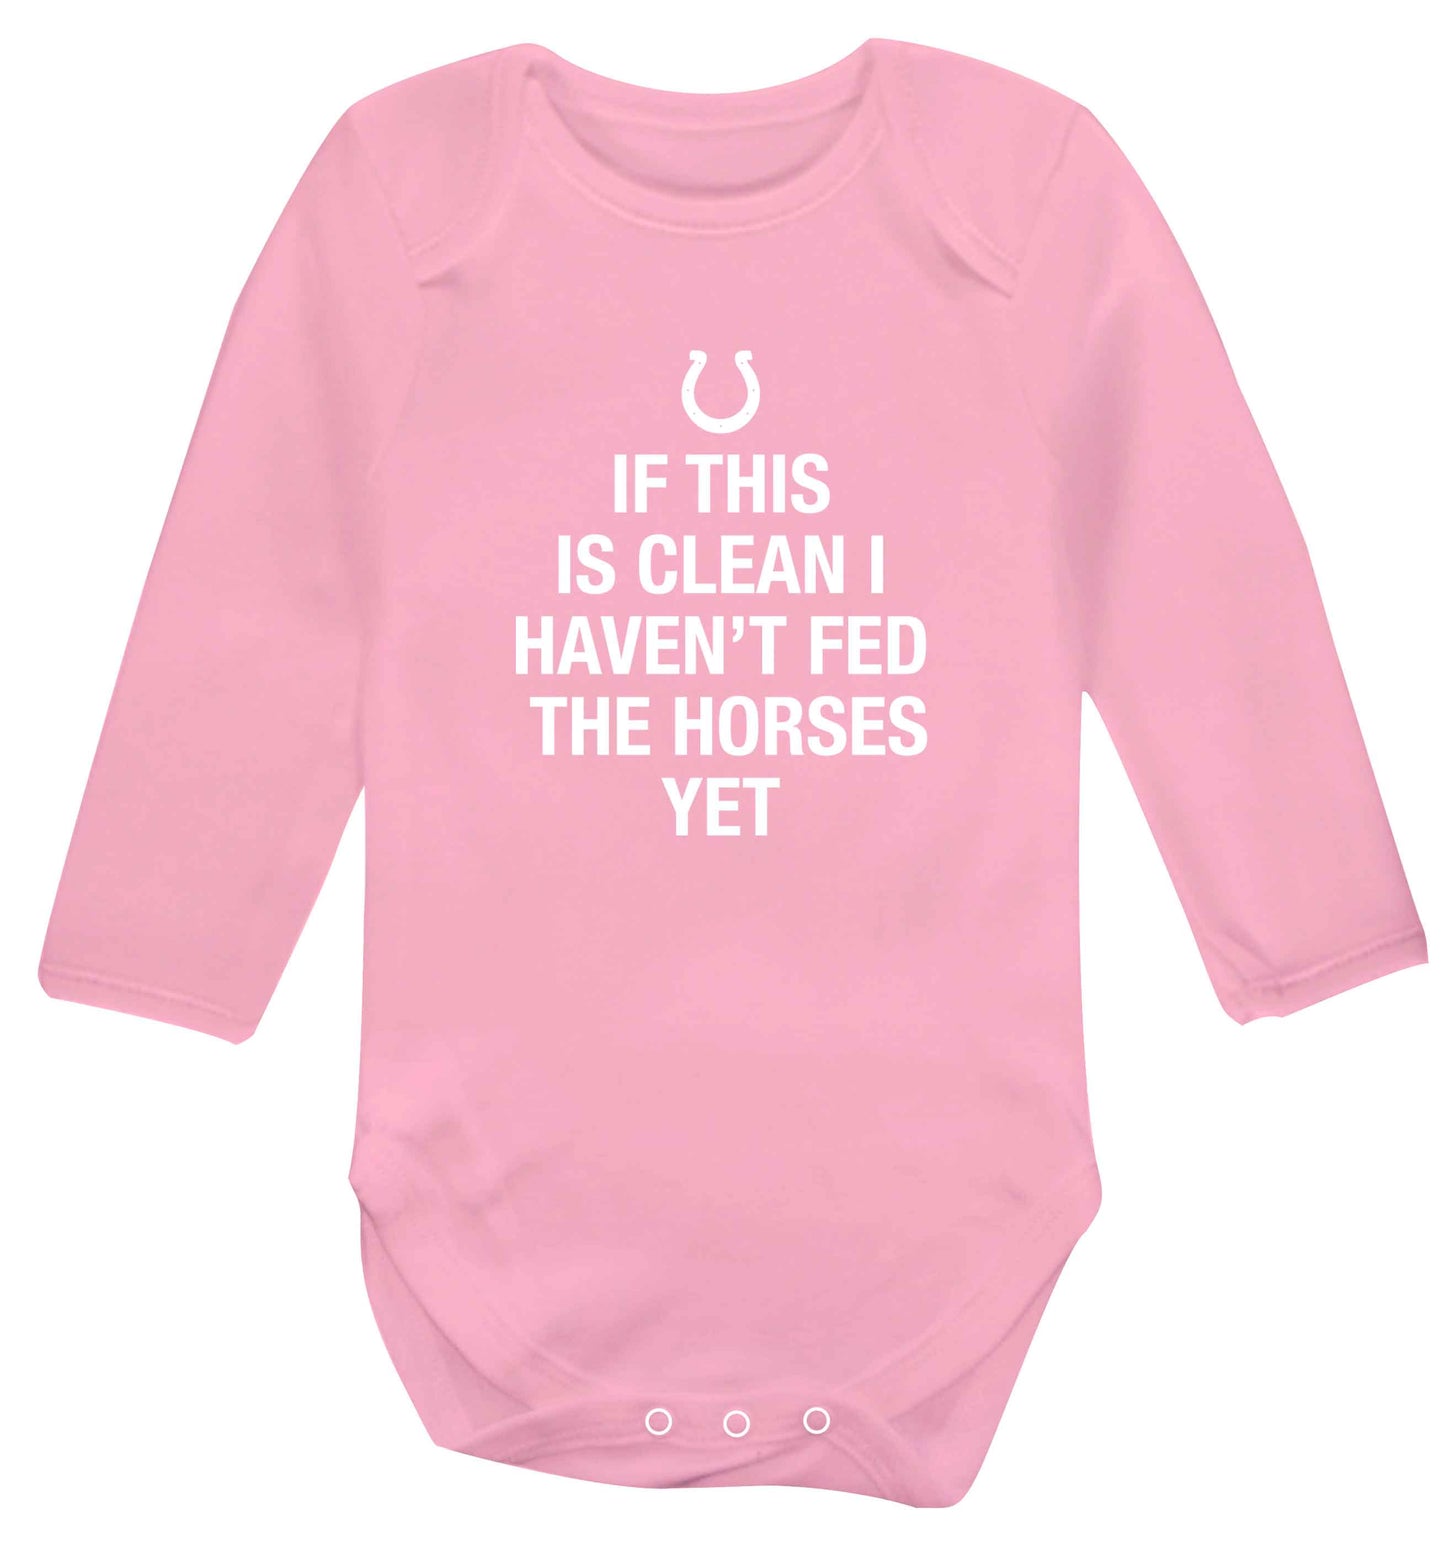 If this isn't clean I haven't fed the horses yet baby vest long sleeved pale pink 6-12 months